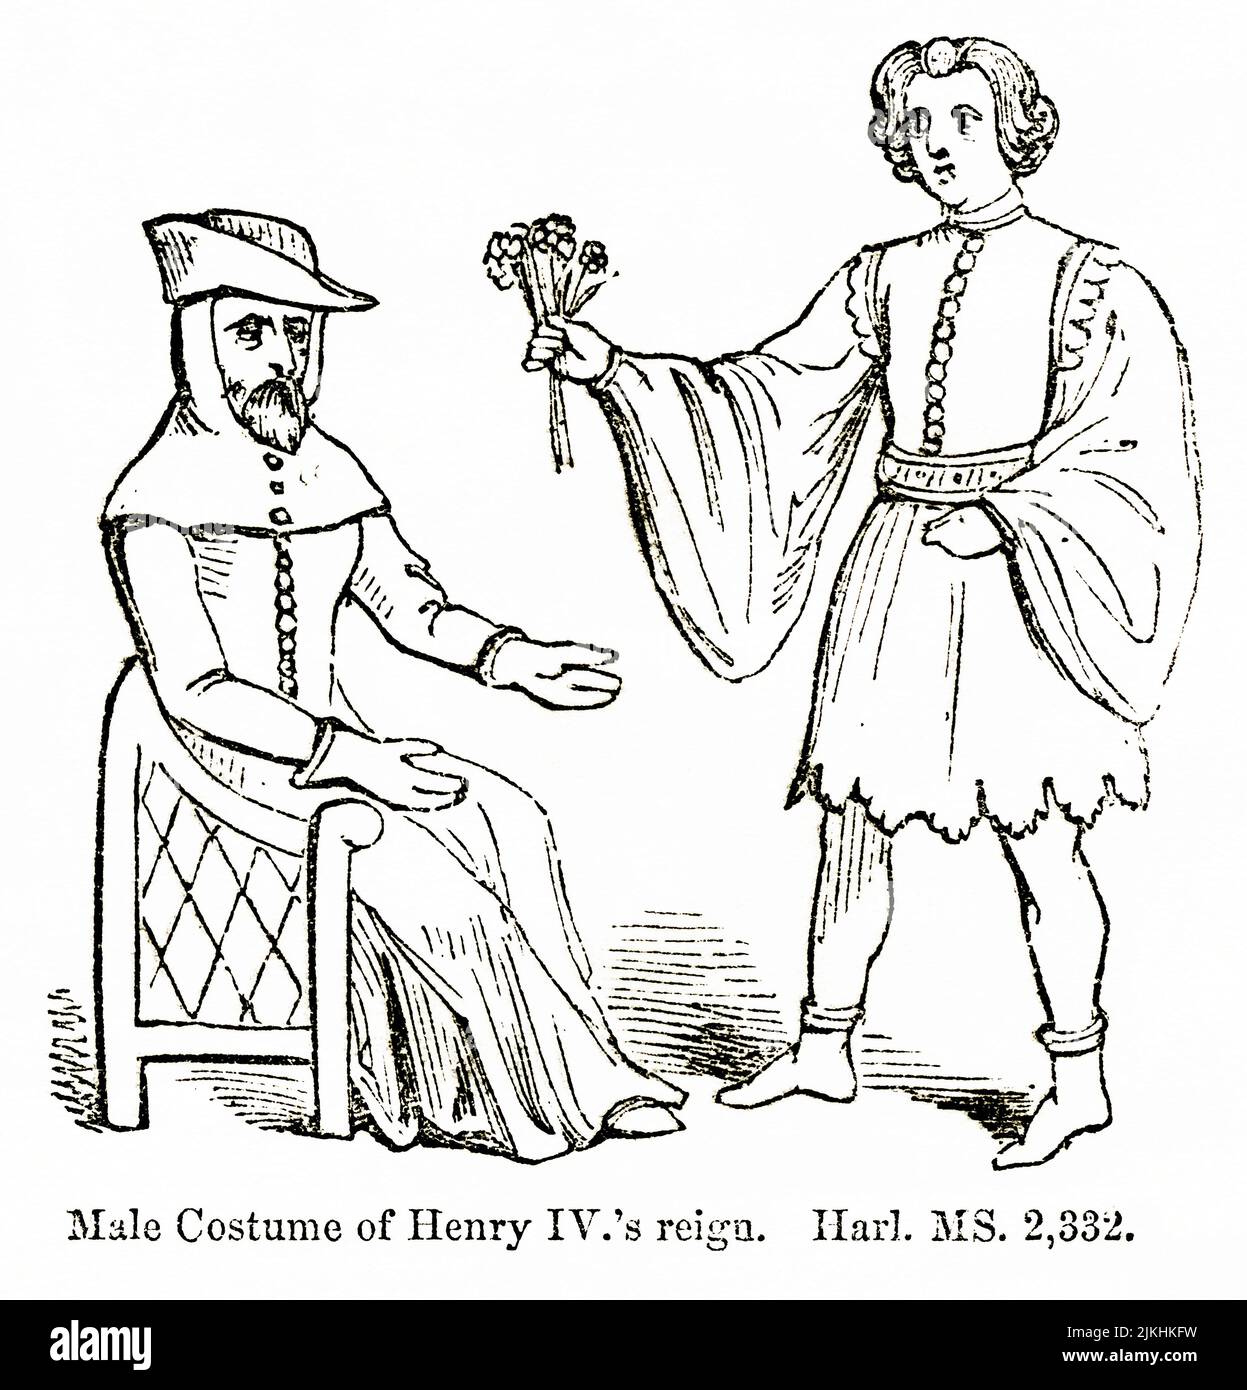 Male Costume of Henry IV’s Reign, Illustration from the Book, 'John Cassel’s Illustrated History of England, Volume II', text by William Howitt, Cassell, Petter, and Galpin, London, 1858 Stock Photo